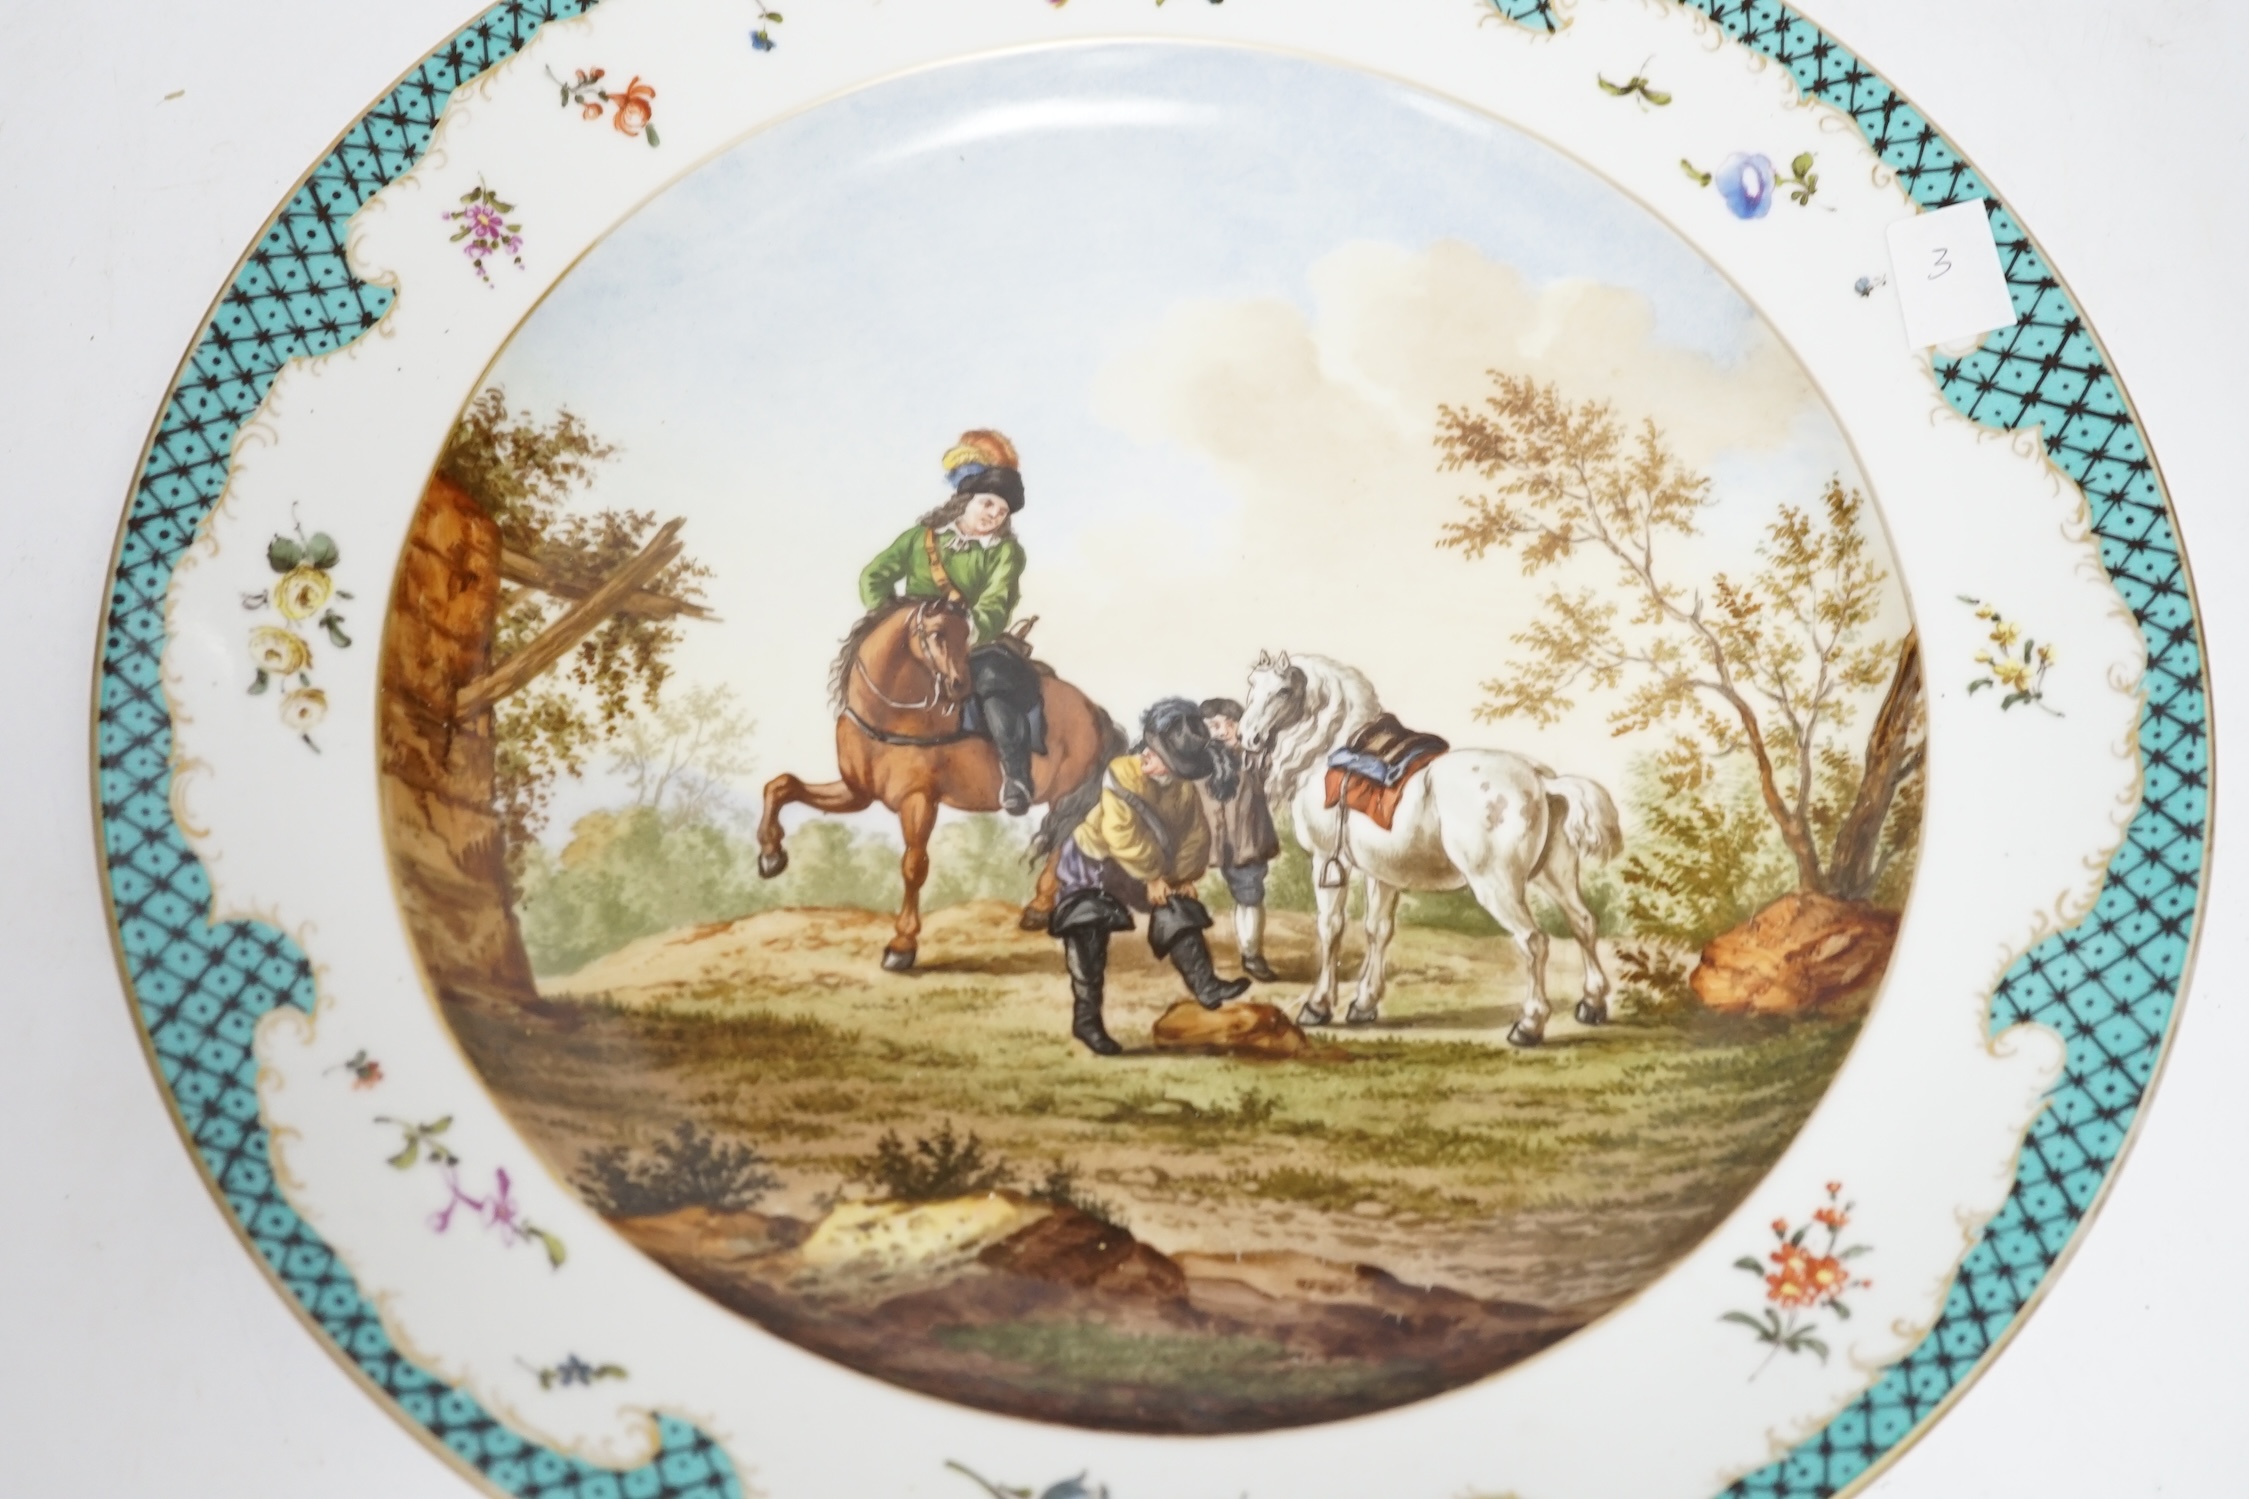 A Meissen style dish decorated with a hunting party, 35.5cm diameter